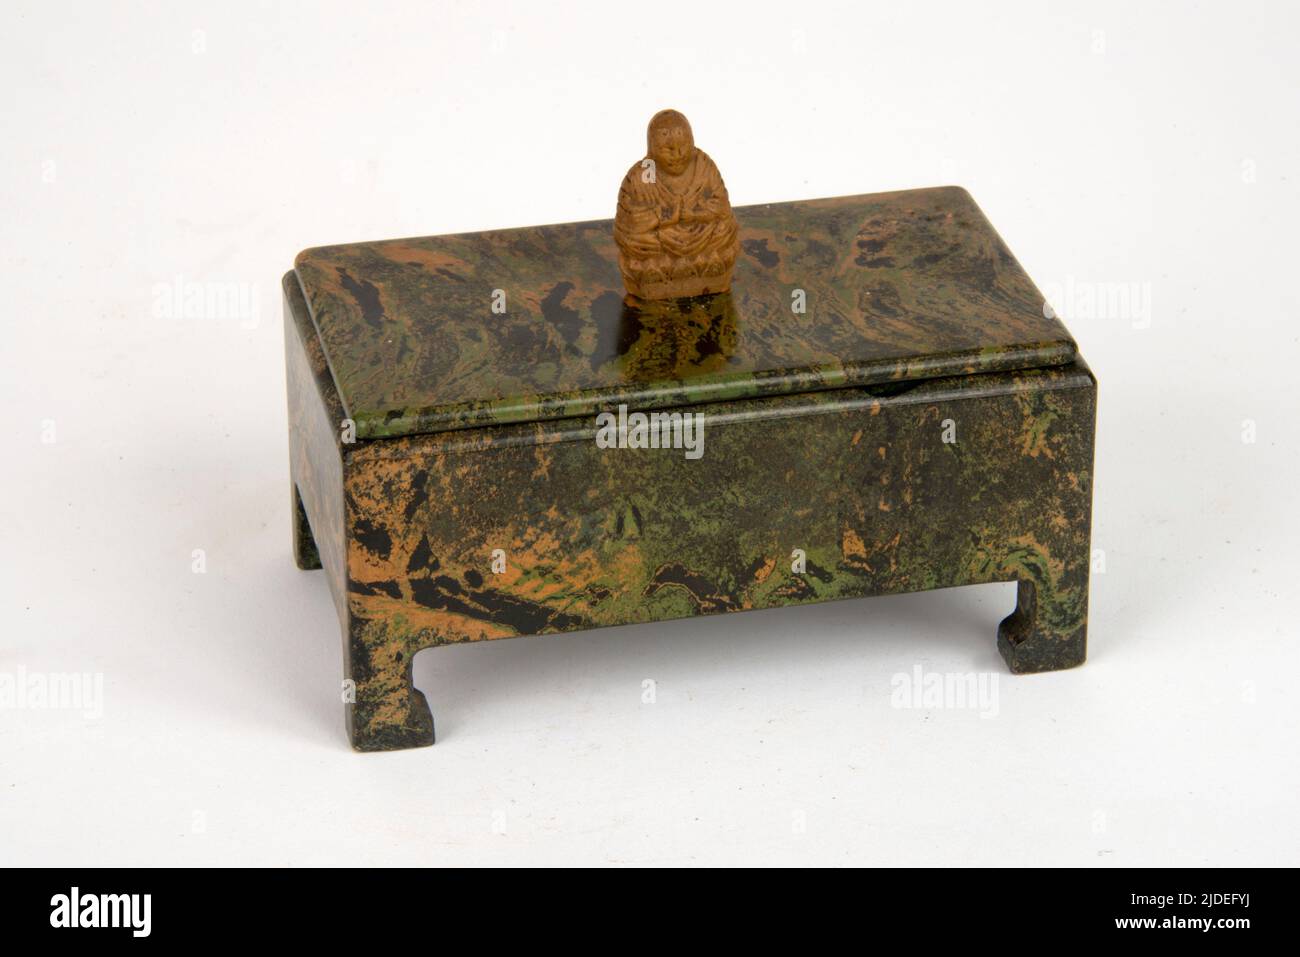 A selection of bakelite and plastic items.  Ebena three-part trinket box with a Buddha figure on the lid with gold-leaf detail. Stock Photo